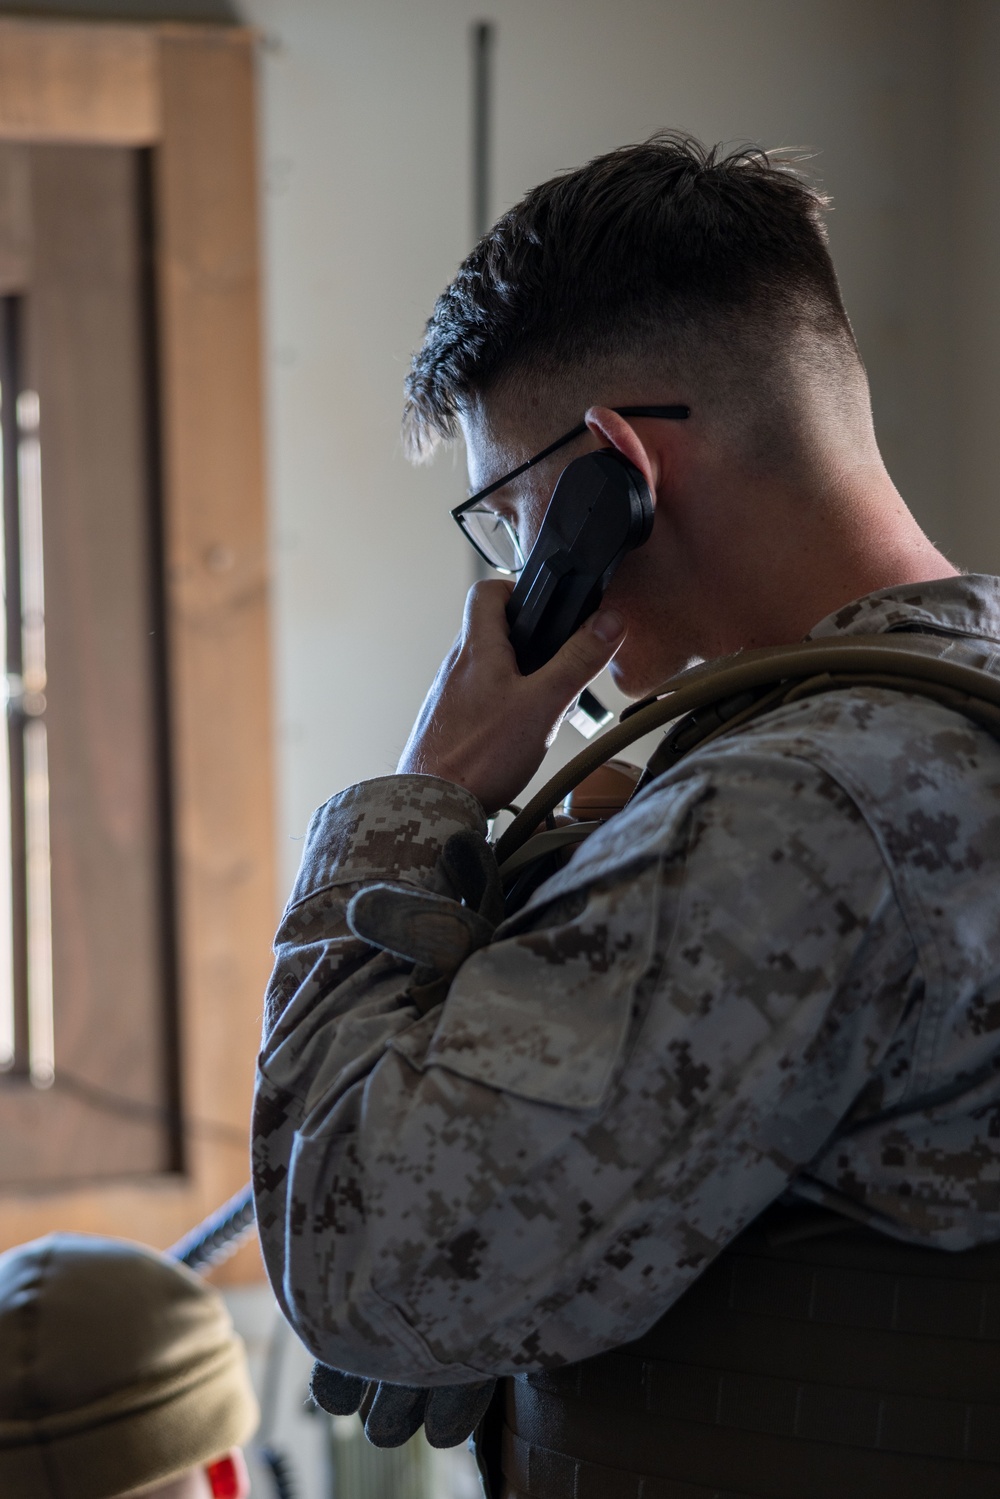 Basic Communications Officer Course 1-24 conducts final training exercise